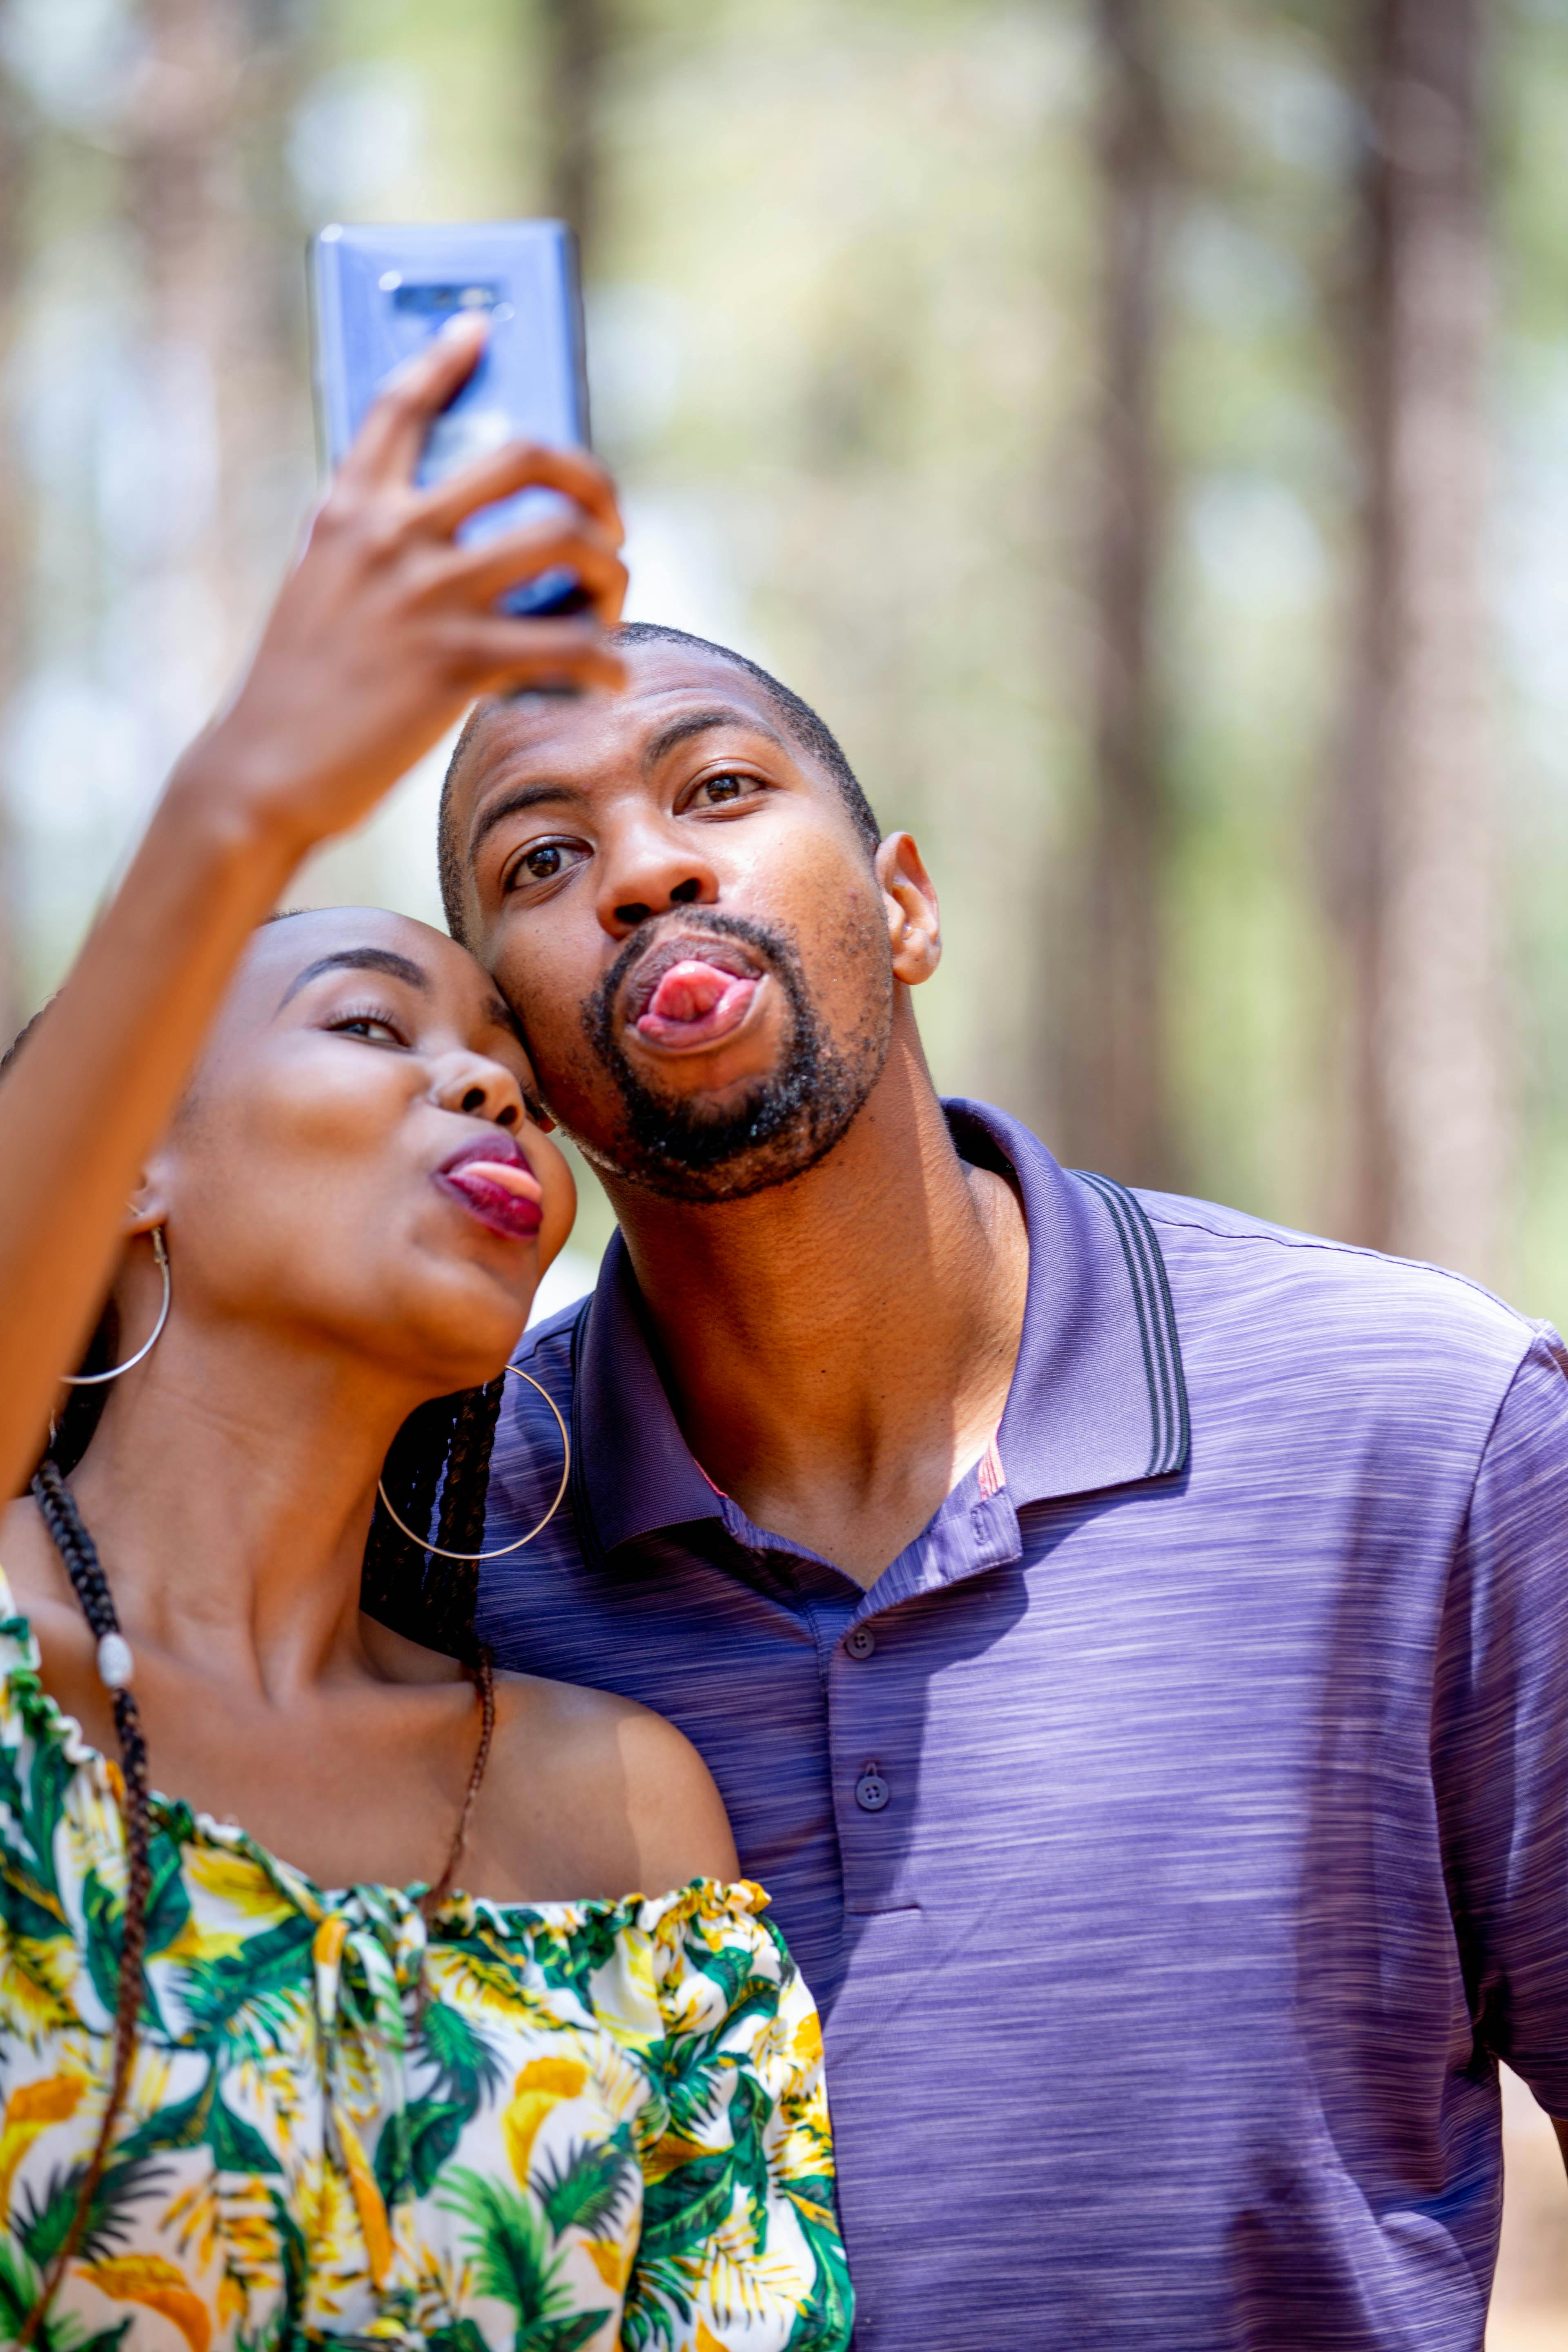 Smiling young couple pose for a selfie Stock Photo - Alamy